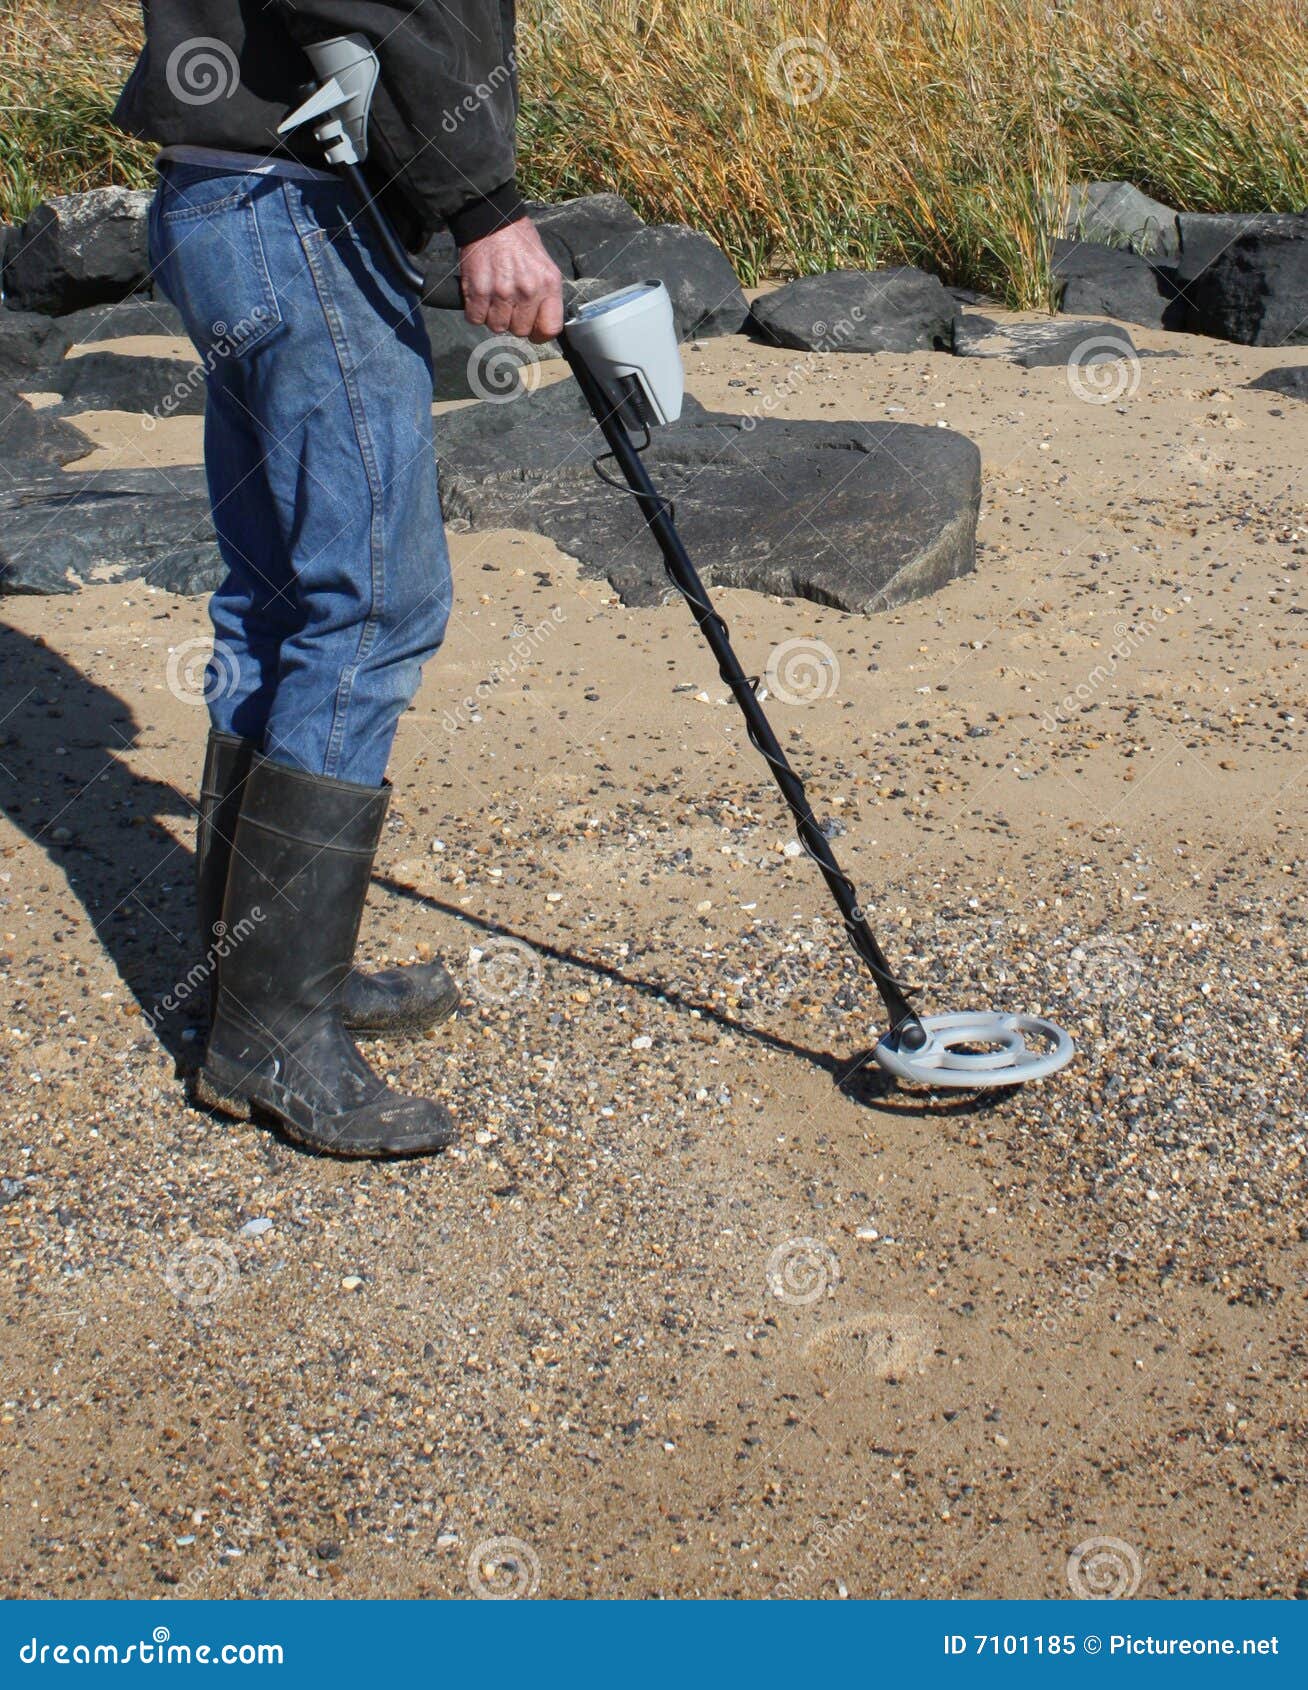 Person Using Metal Detector Royalty Free Stock Photo - Image: 7101185